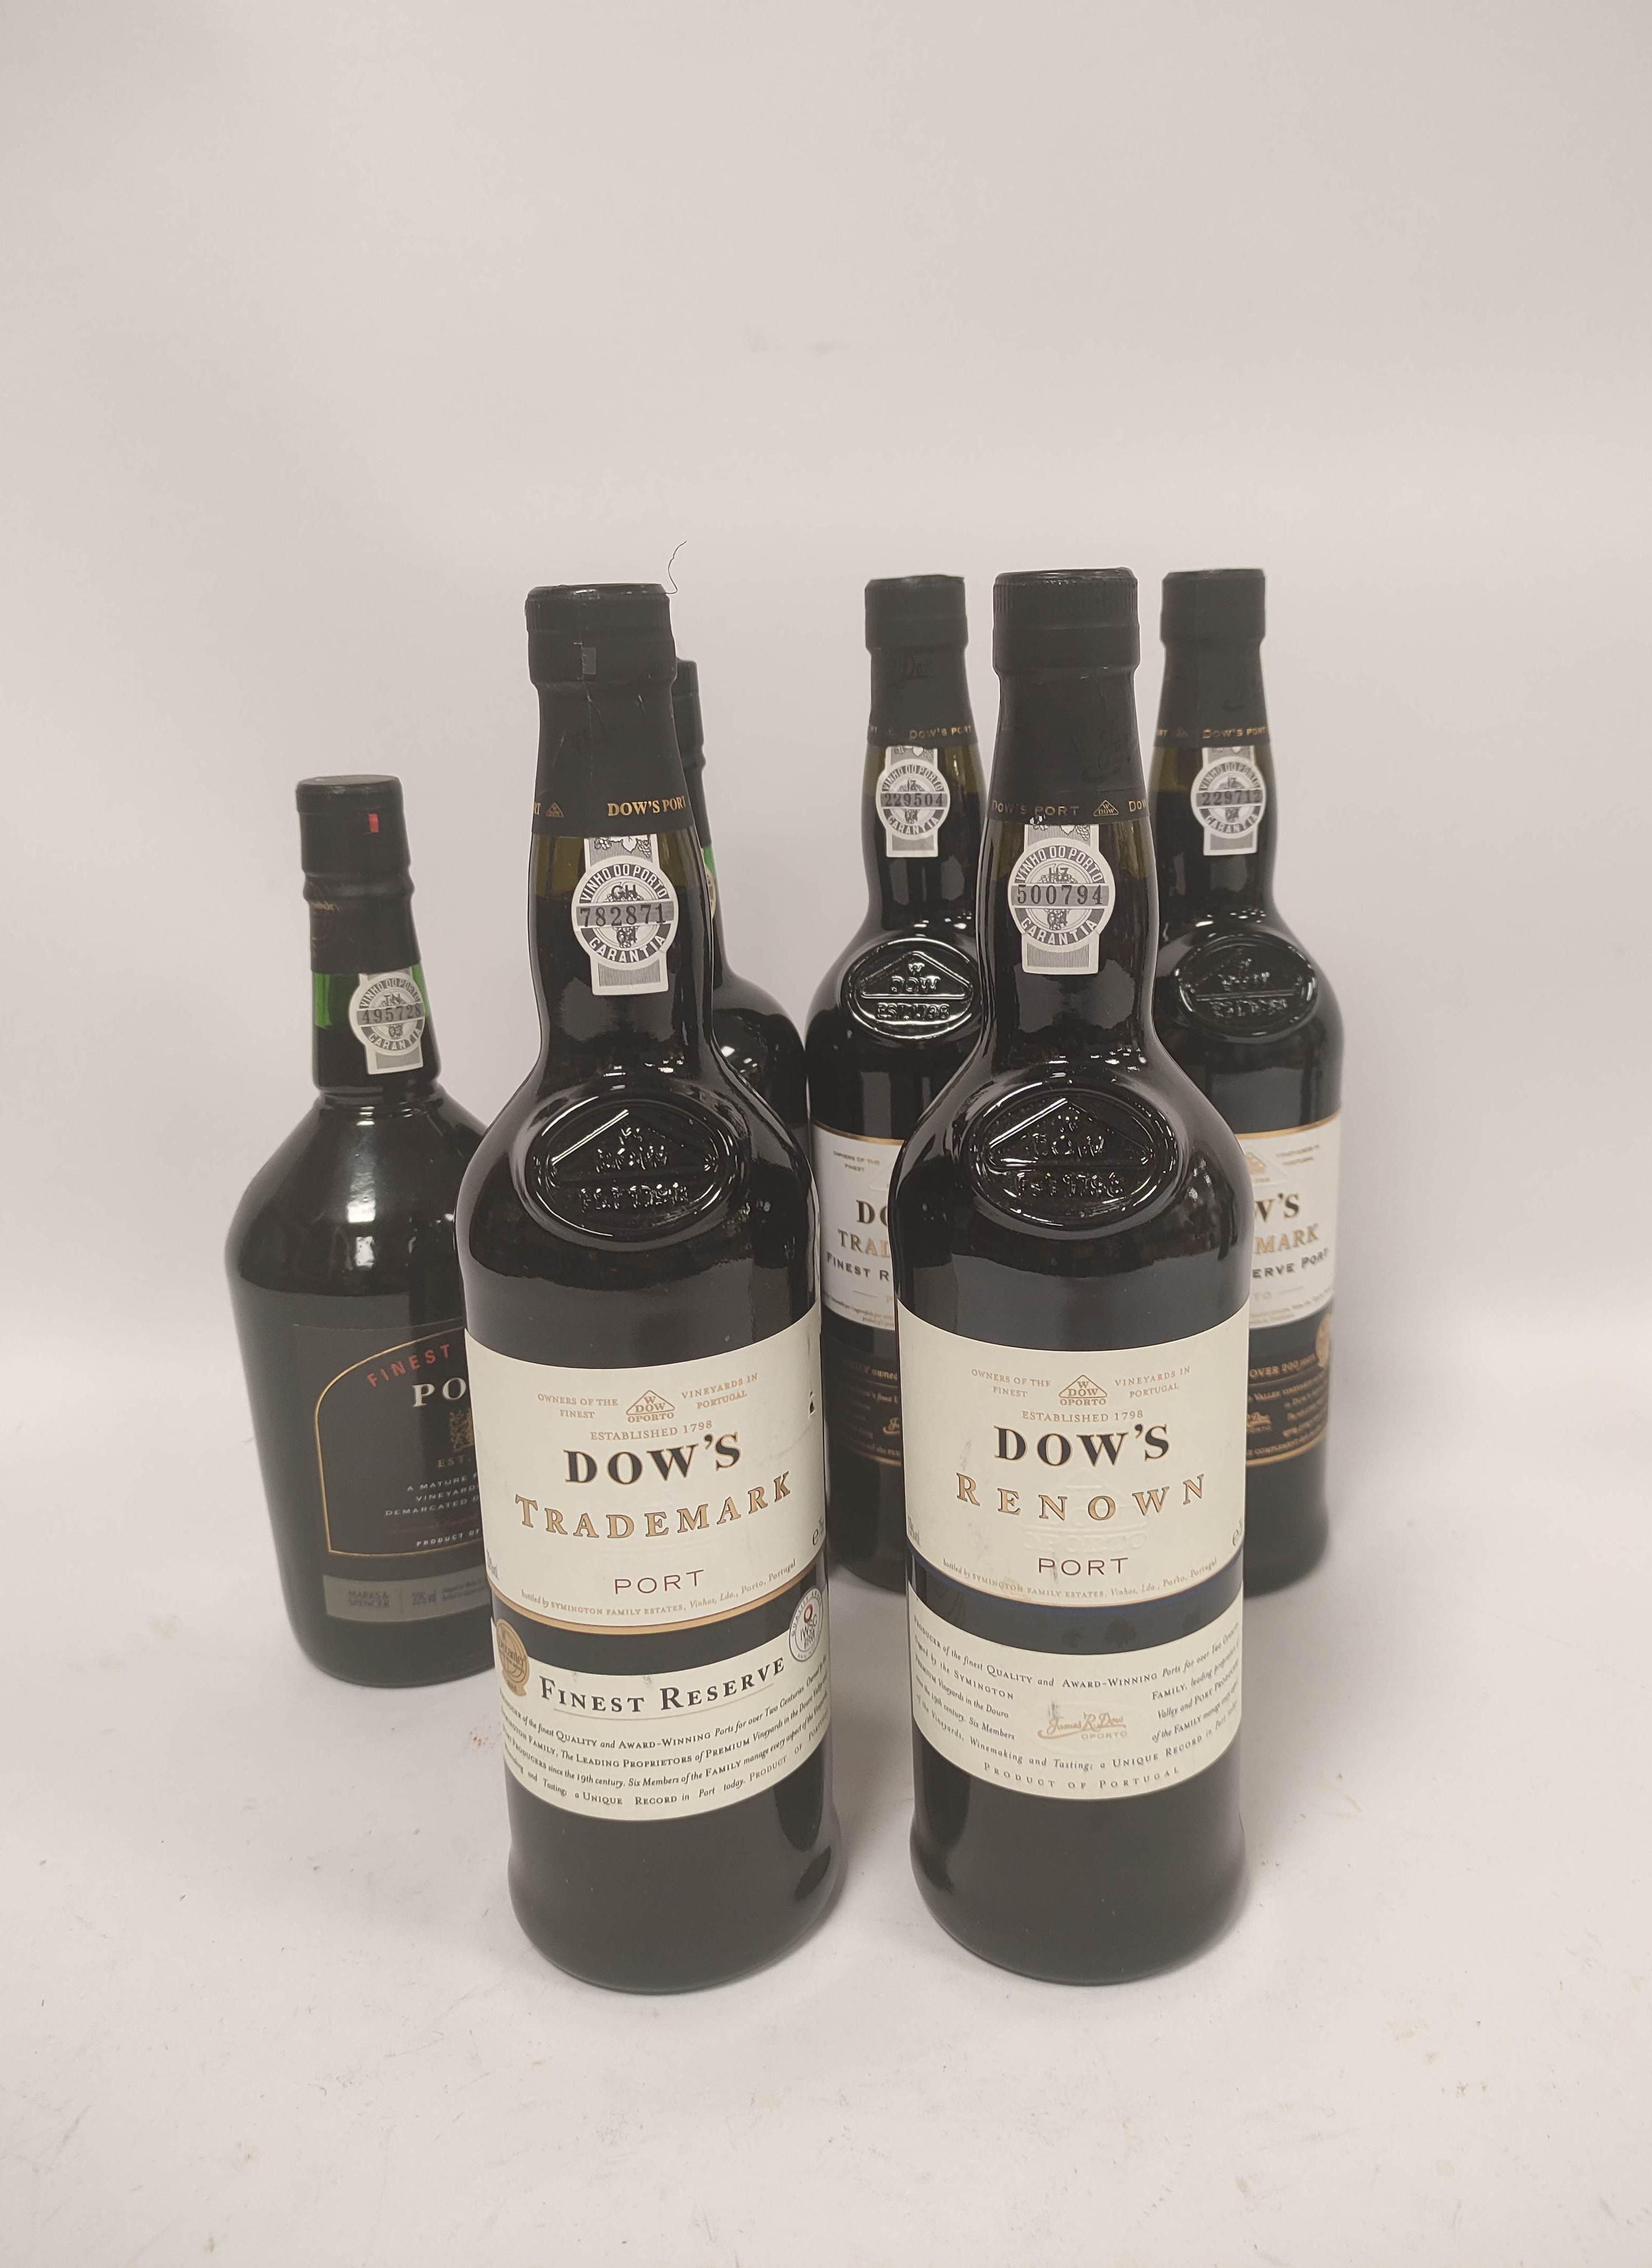 Six bottles of port to include four bottles of Dow's Trademark Finest Reserve Port, 75cl, 20% vol,